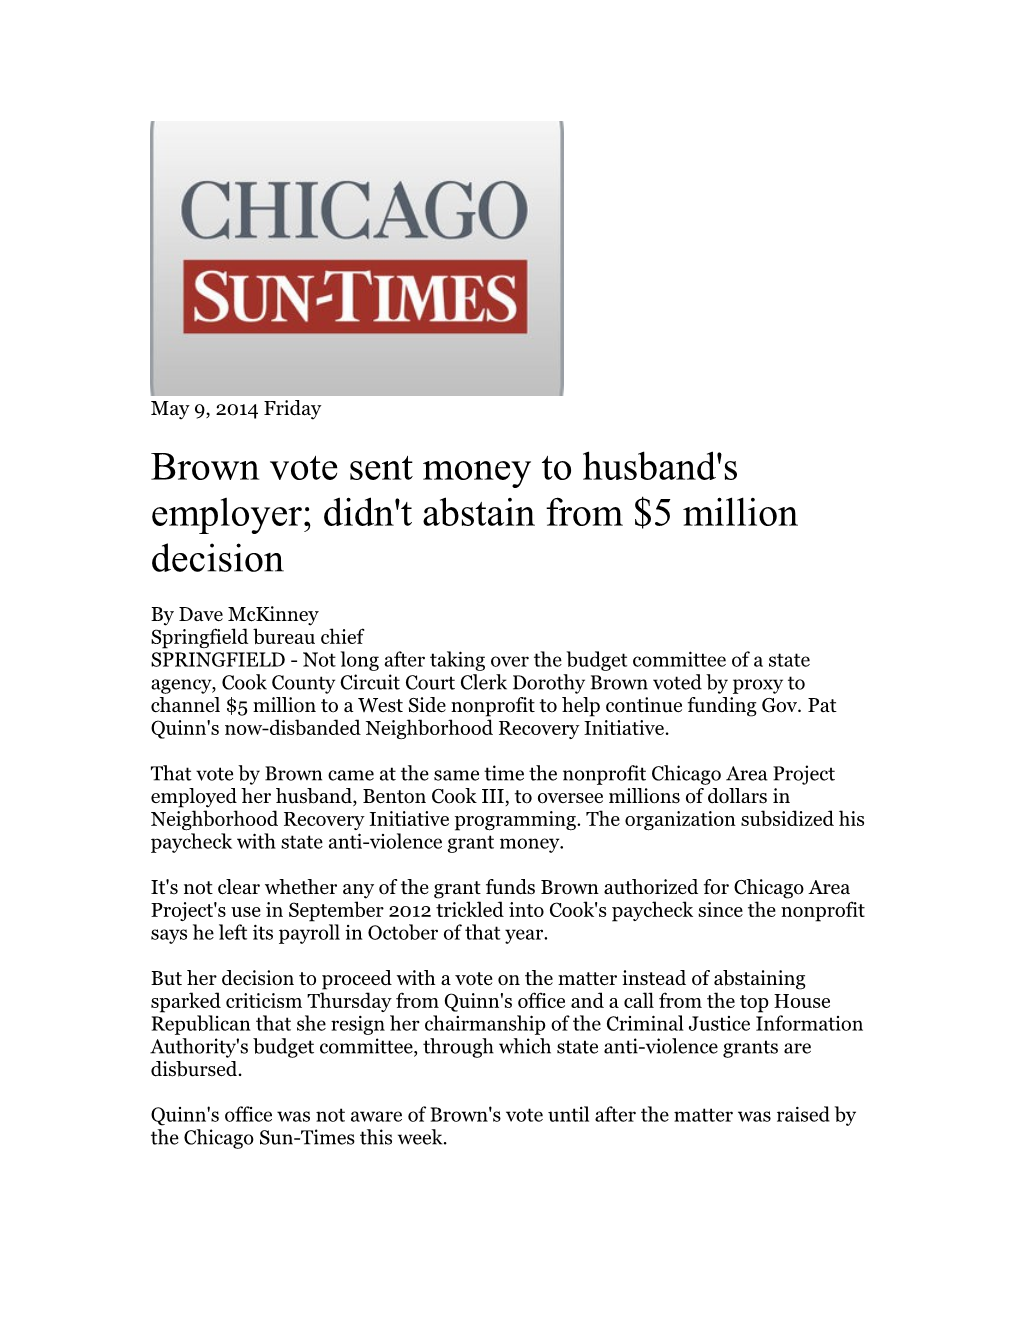 Brown Vote Sent Money to Husband's Employer; Didn't Abstain from $5 Million Decision